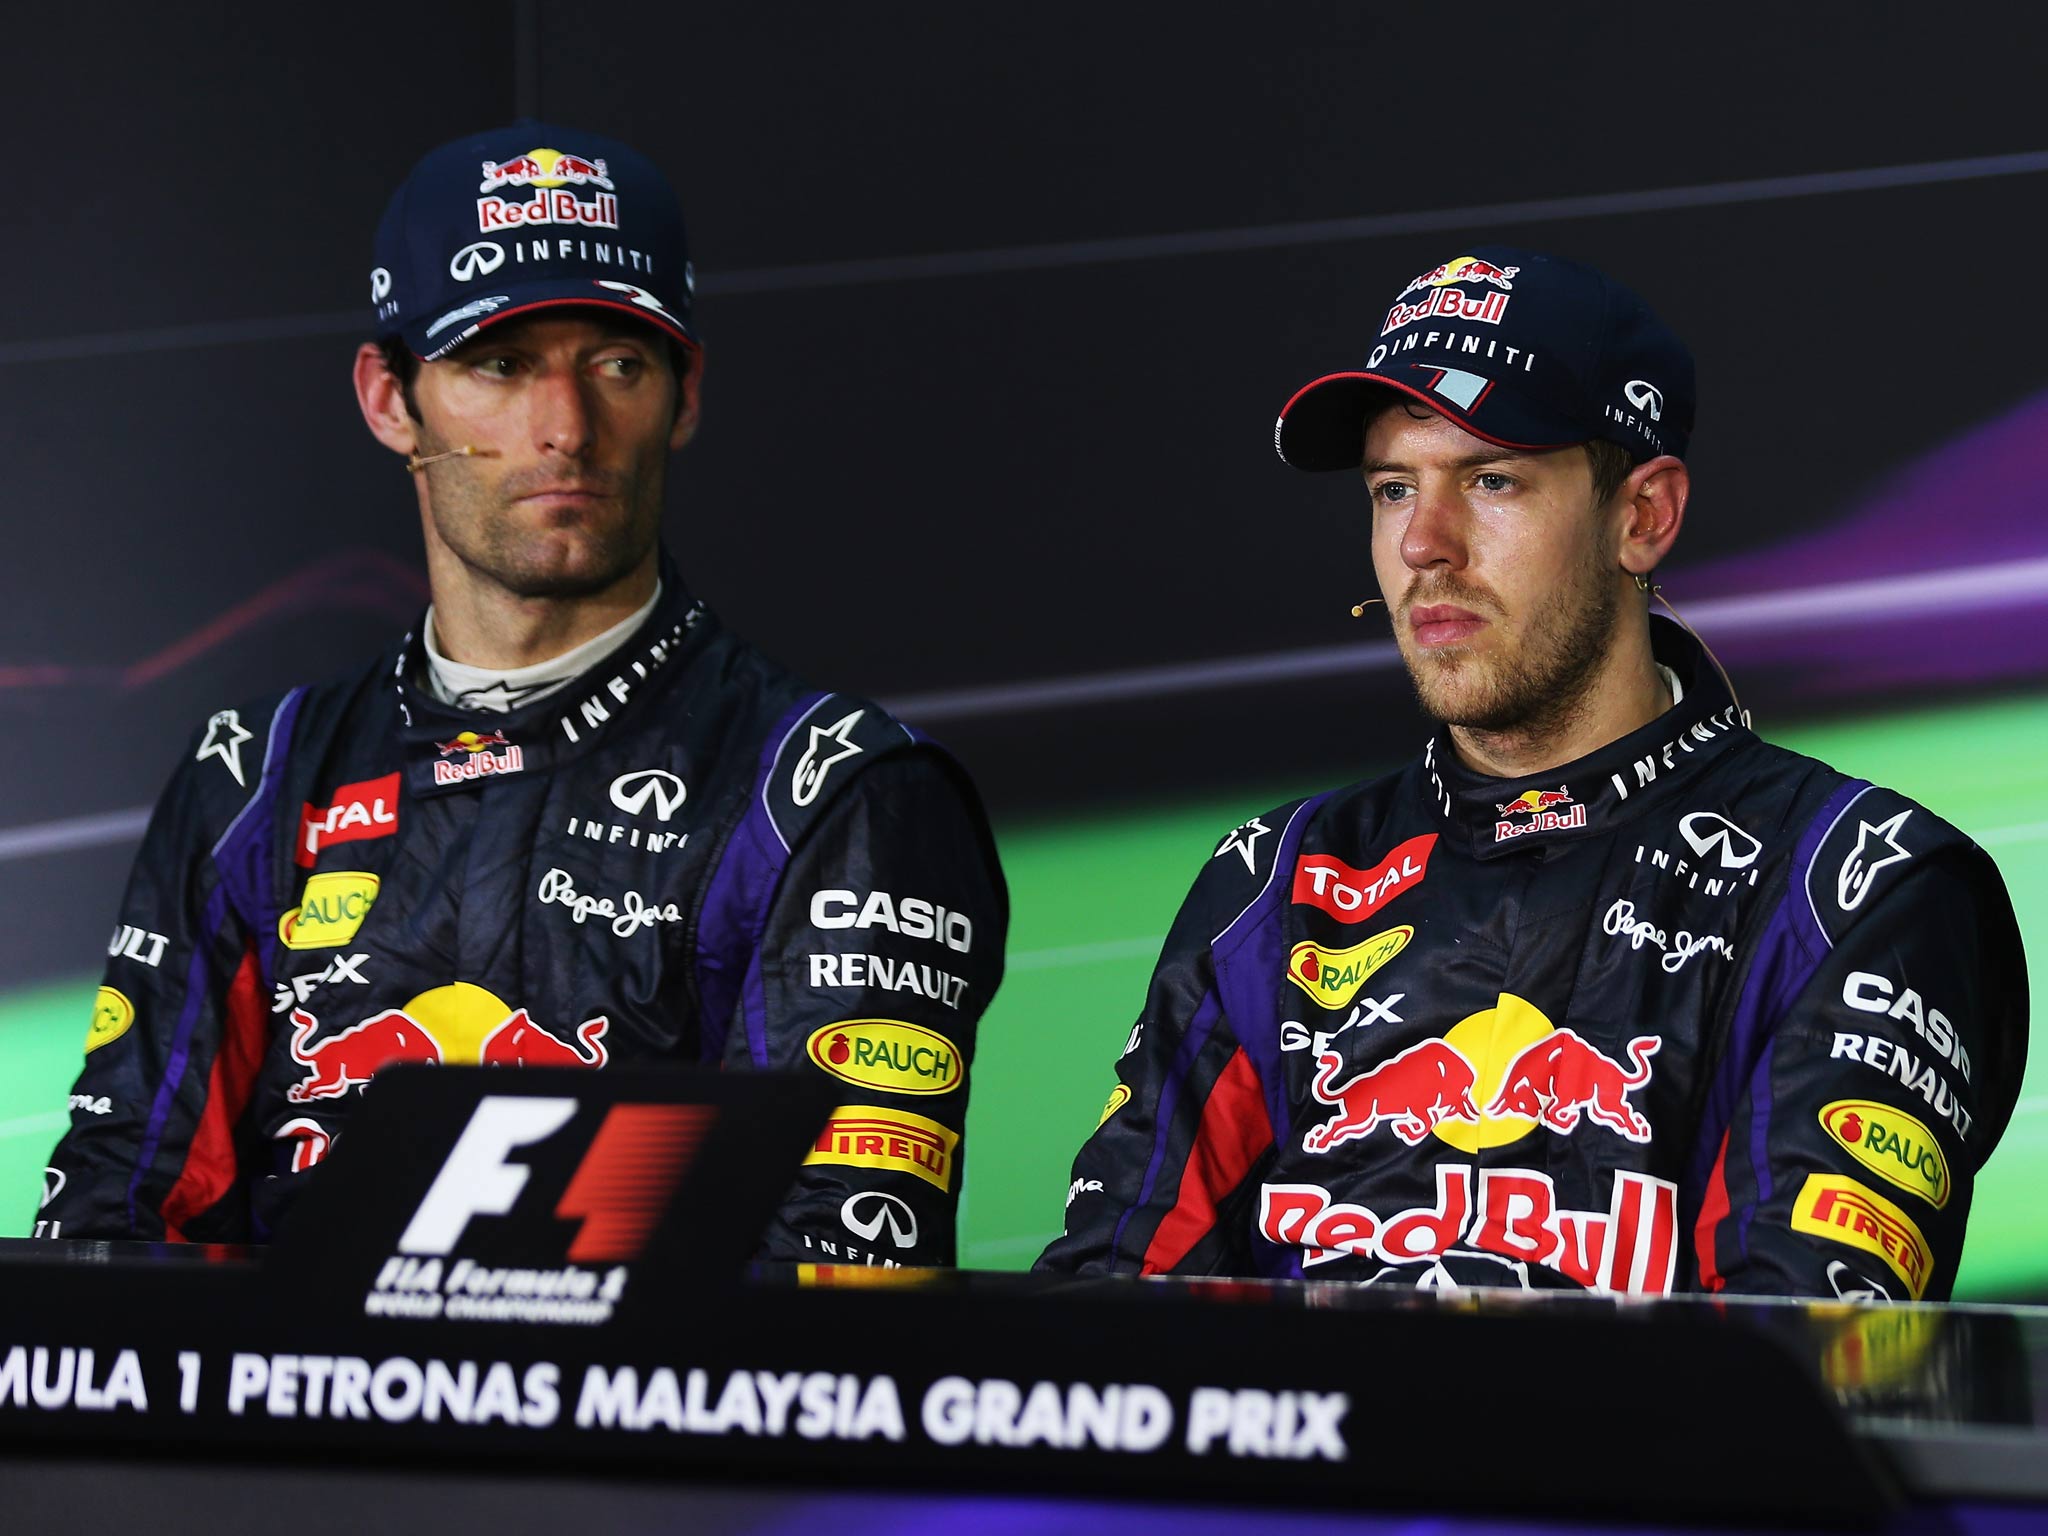 Sebastian Vettel v Mark Webber The three-time World Champion ignored team orders in Sepang to fight his way past his Australian team-mate to win the Malaysian Grand Prix. As the Red Bull duo duelled on the track, team principal Christian Horn